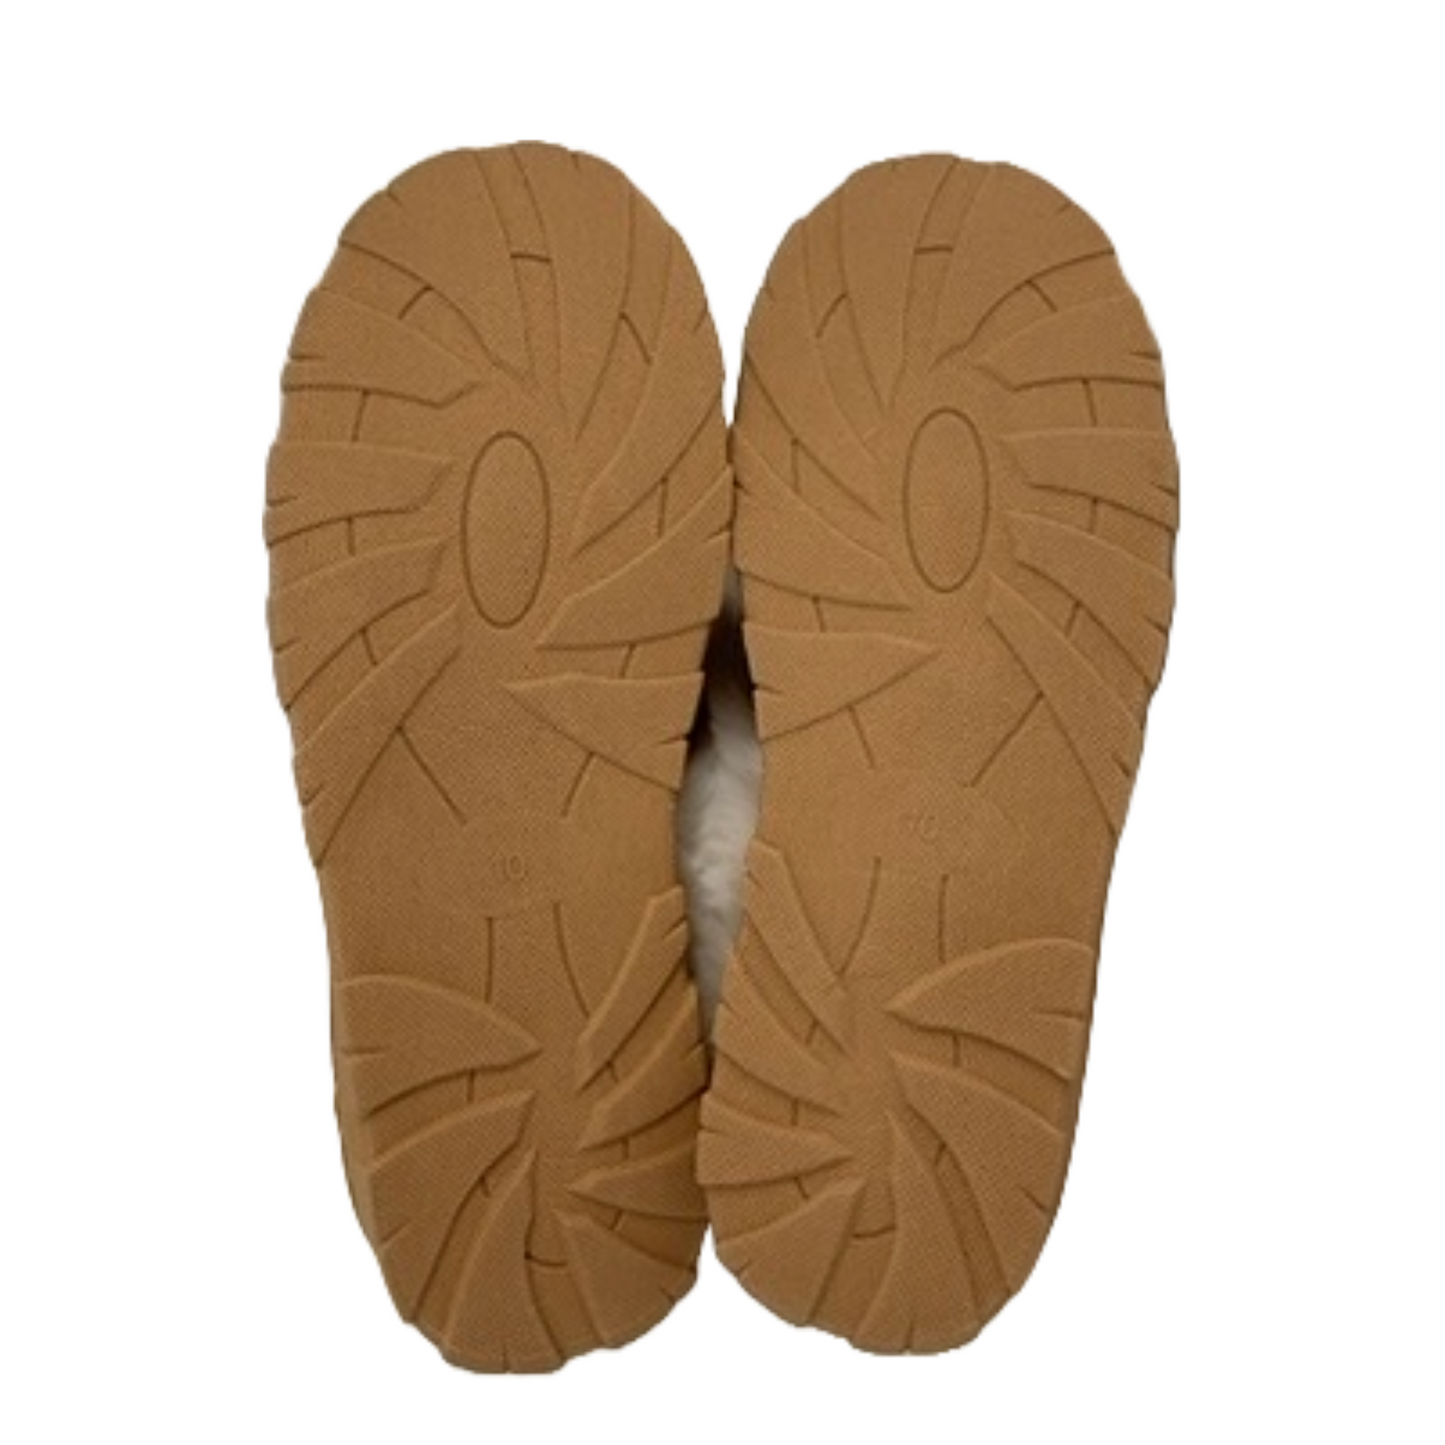 Sole Mattes Slippers Size: 10 Color: Beige